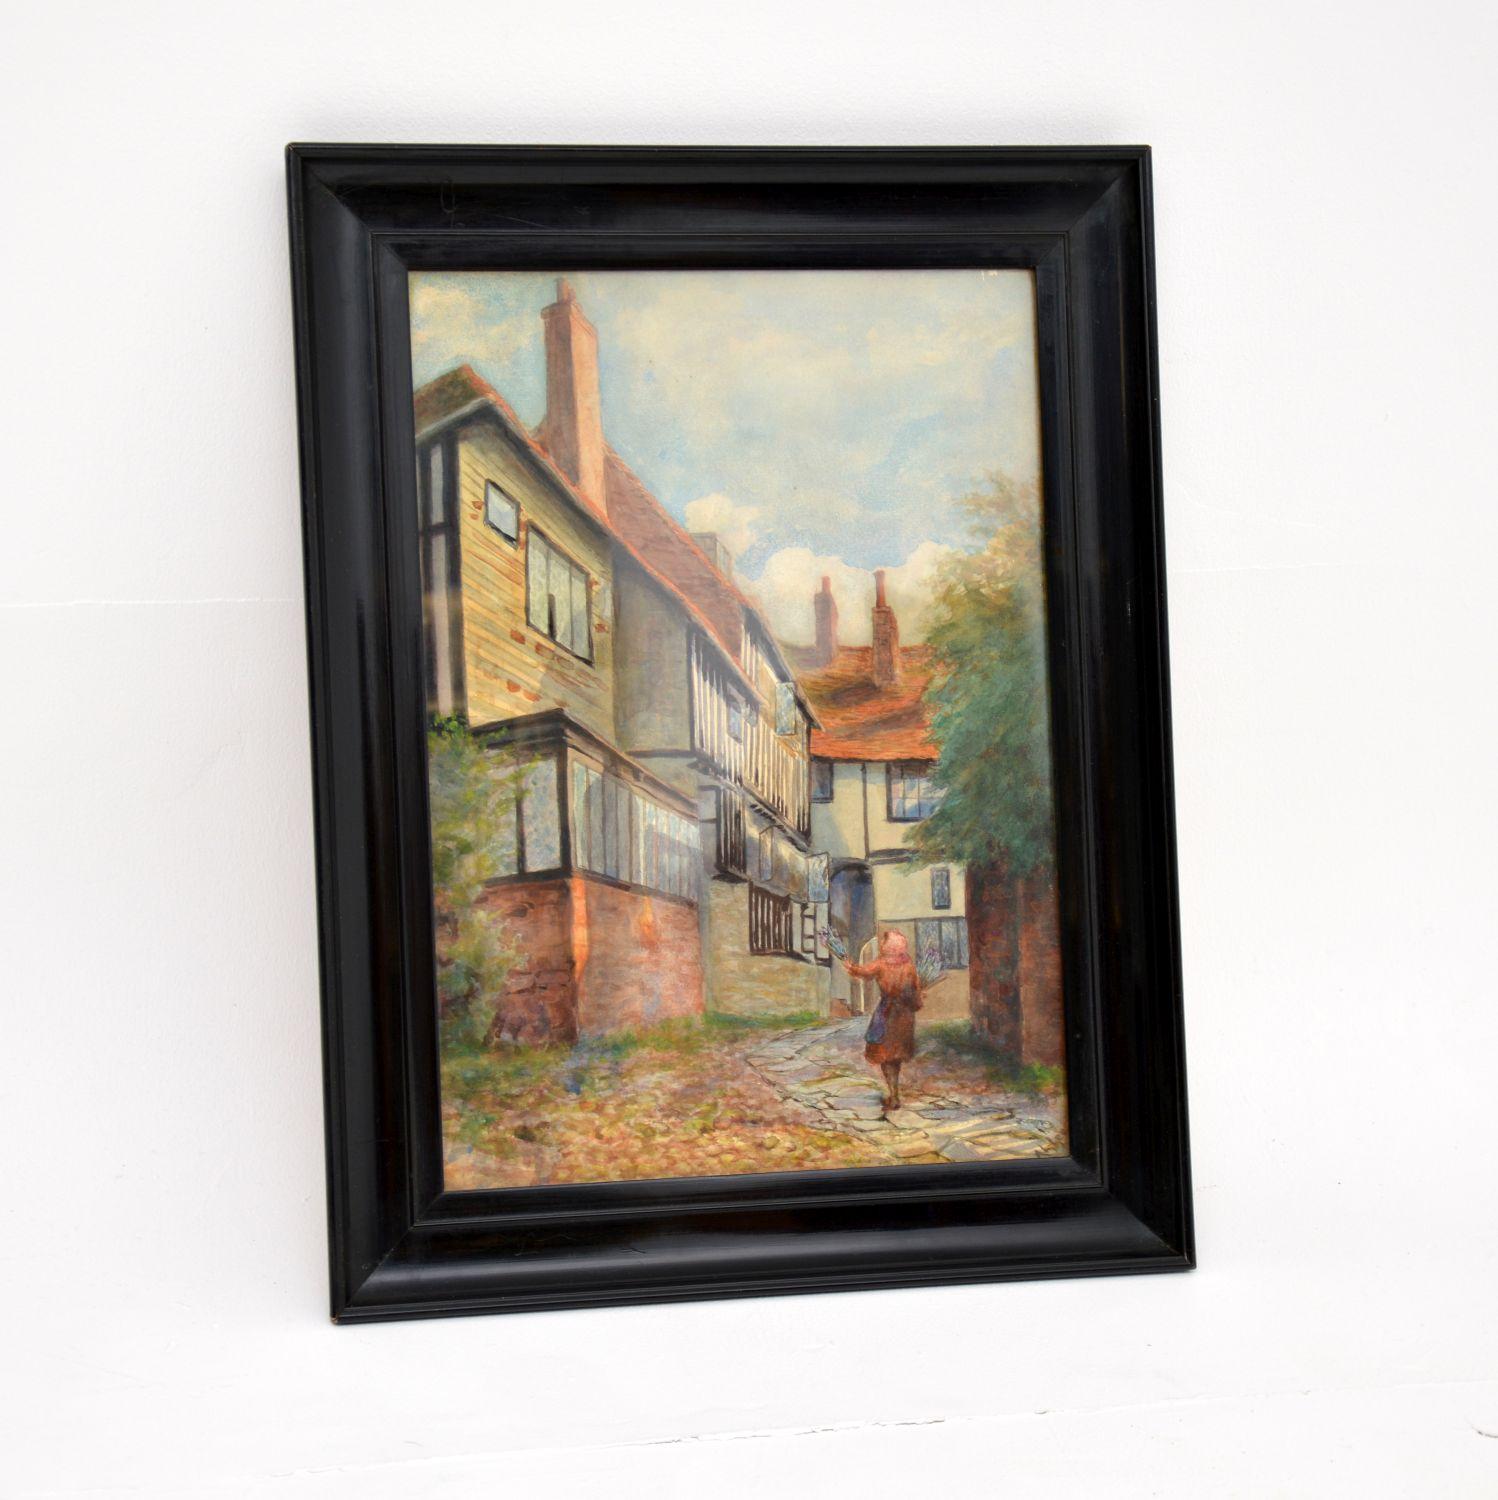 A stunning original antique watercolour painting of the historic 600 year old Meramid Inn in Rye. This is by the artist Annie L. Lee, it dates from around the late nineteenth century.

This is beautifully executed and it depicts a wonderful scene.